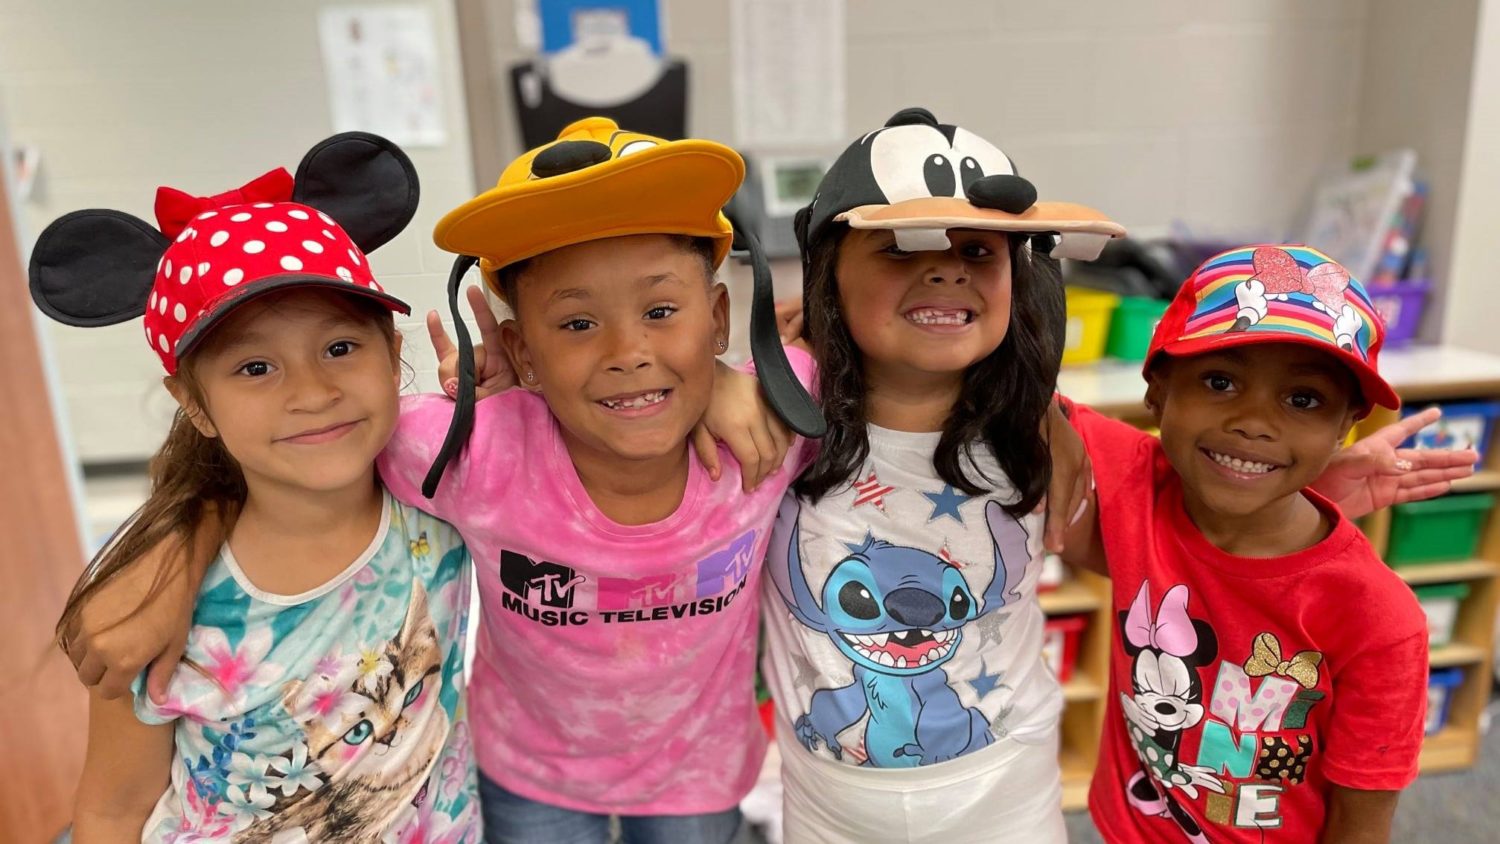 Four students smile while wearing fun hats.